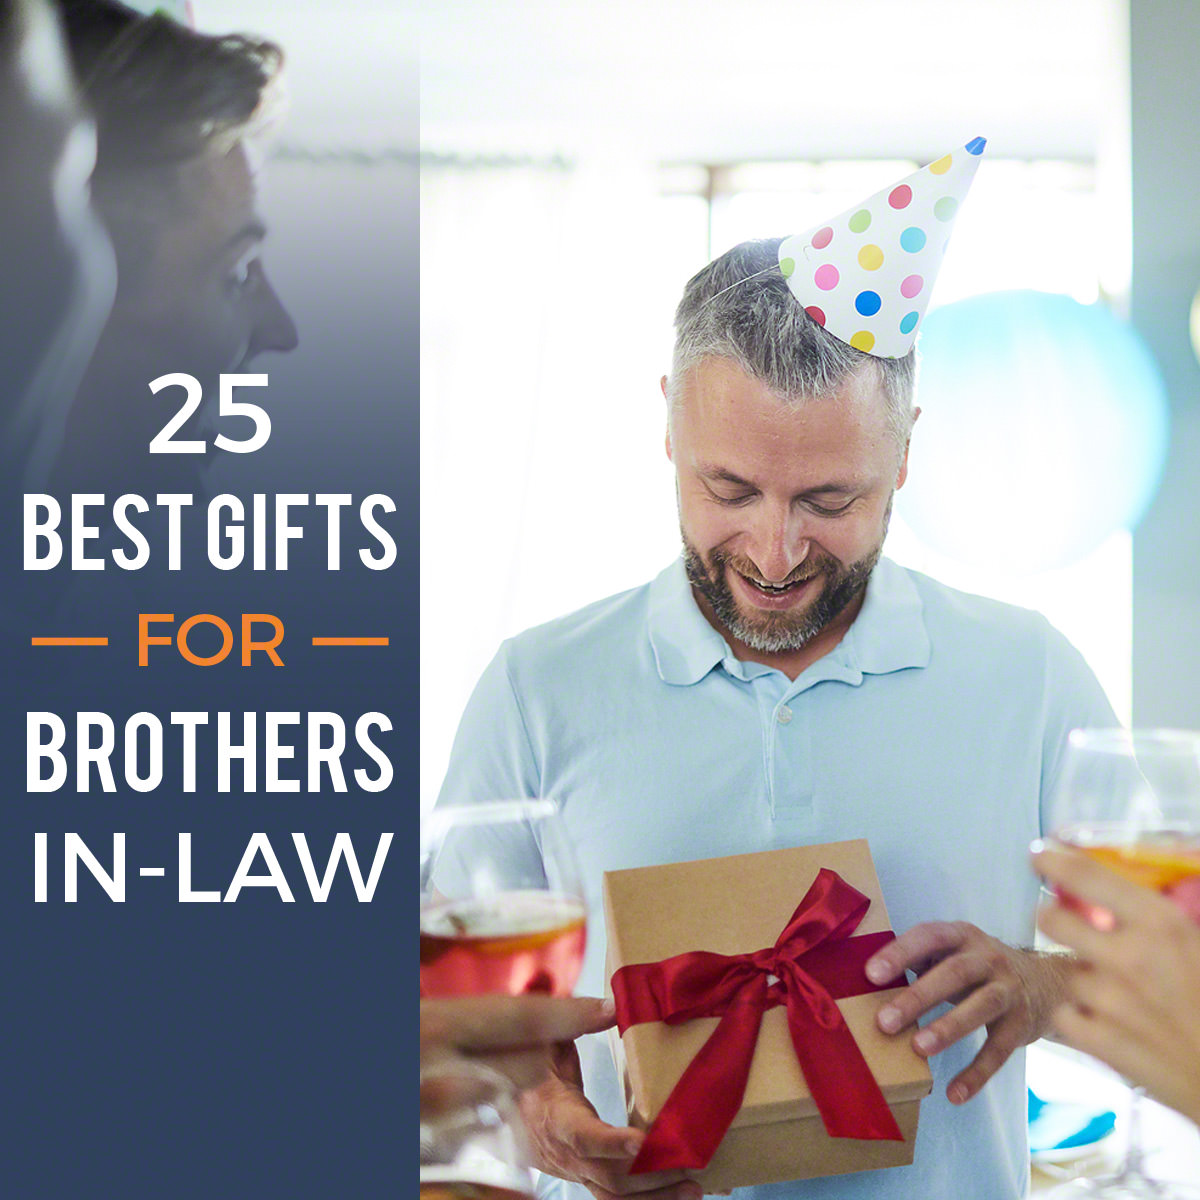 30 Best Gifts For Your Brother-In-Law: Fun, Affordable Ideas